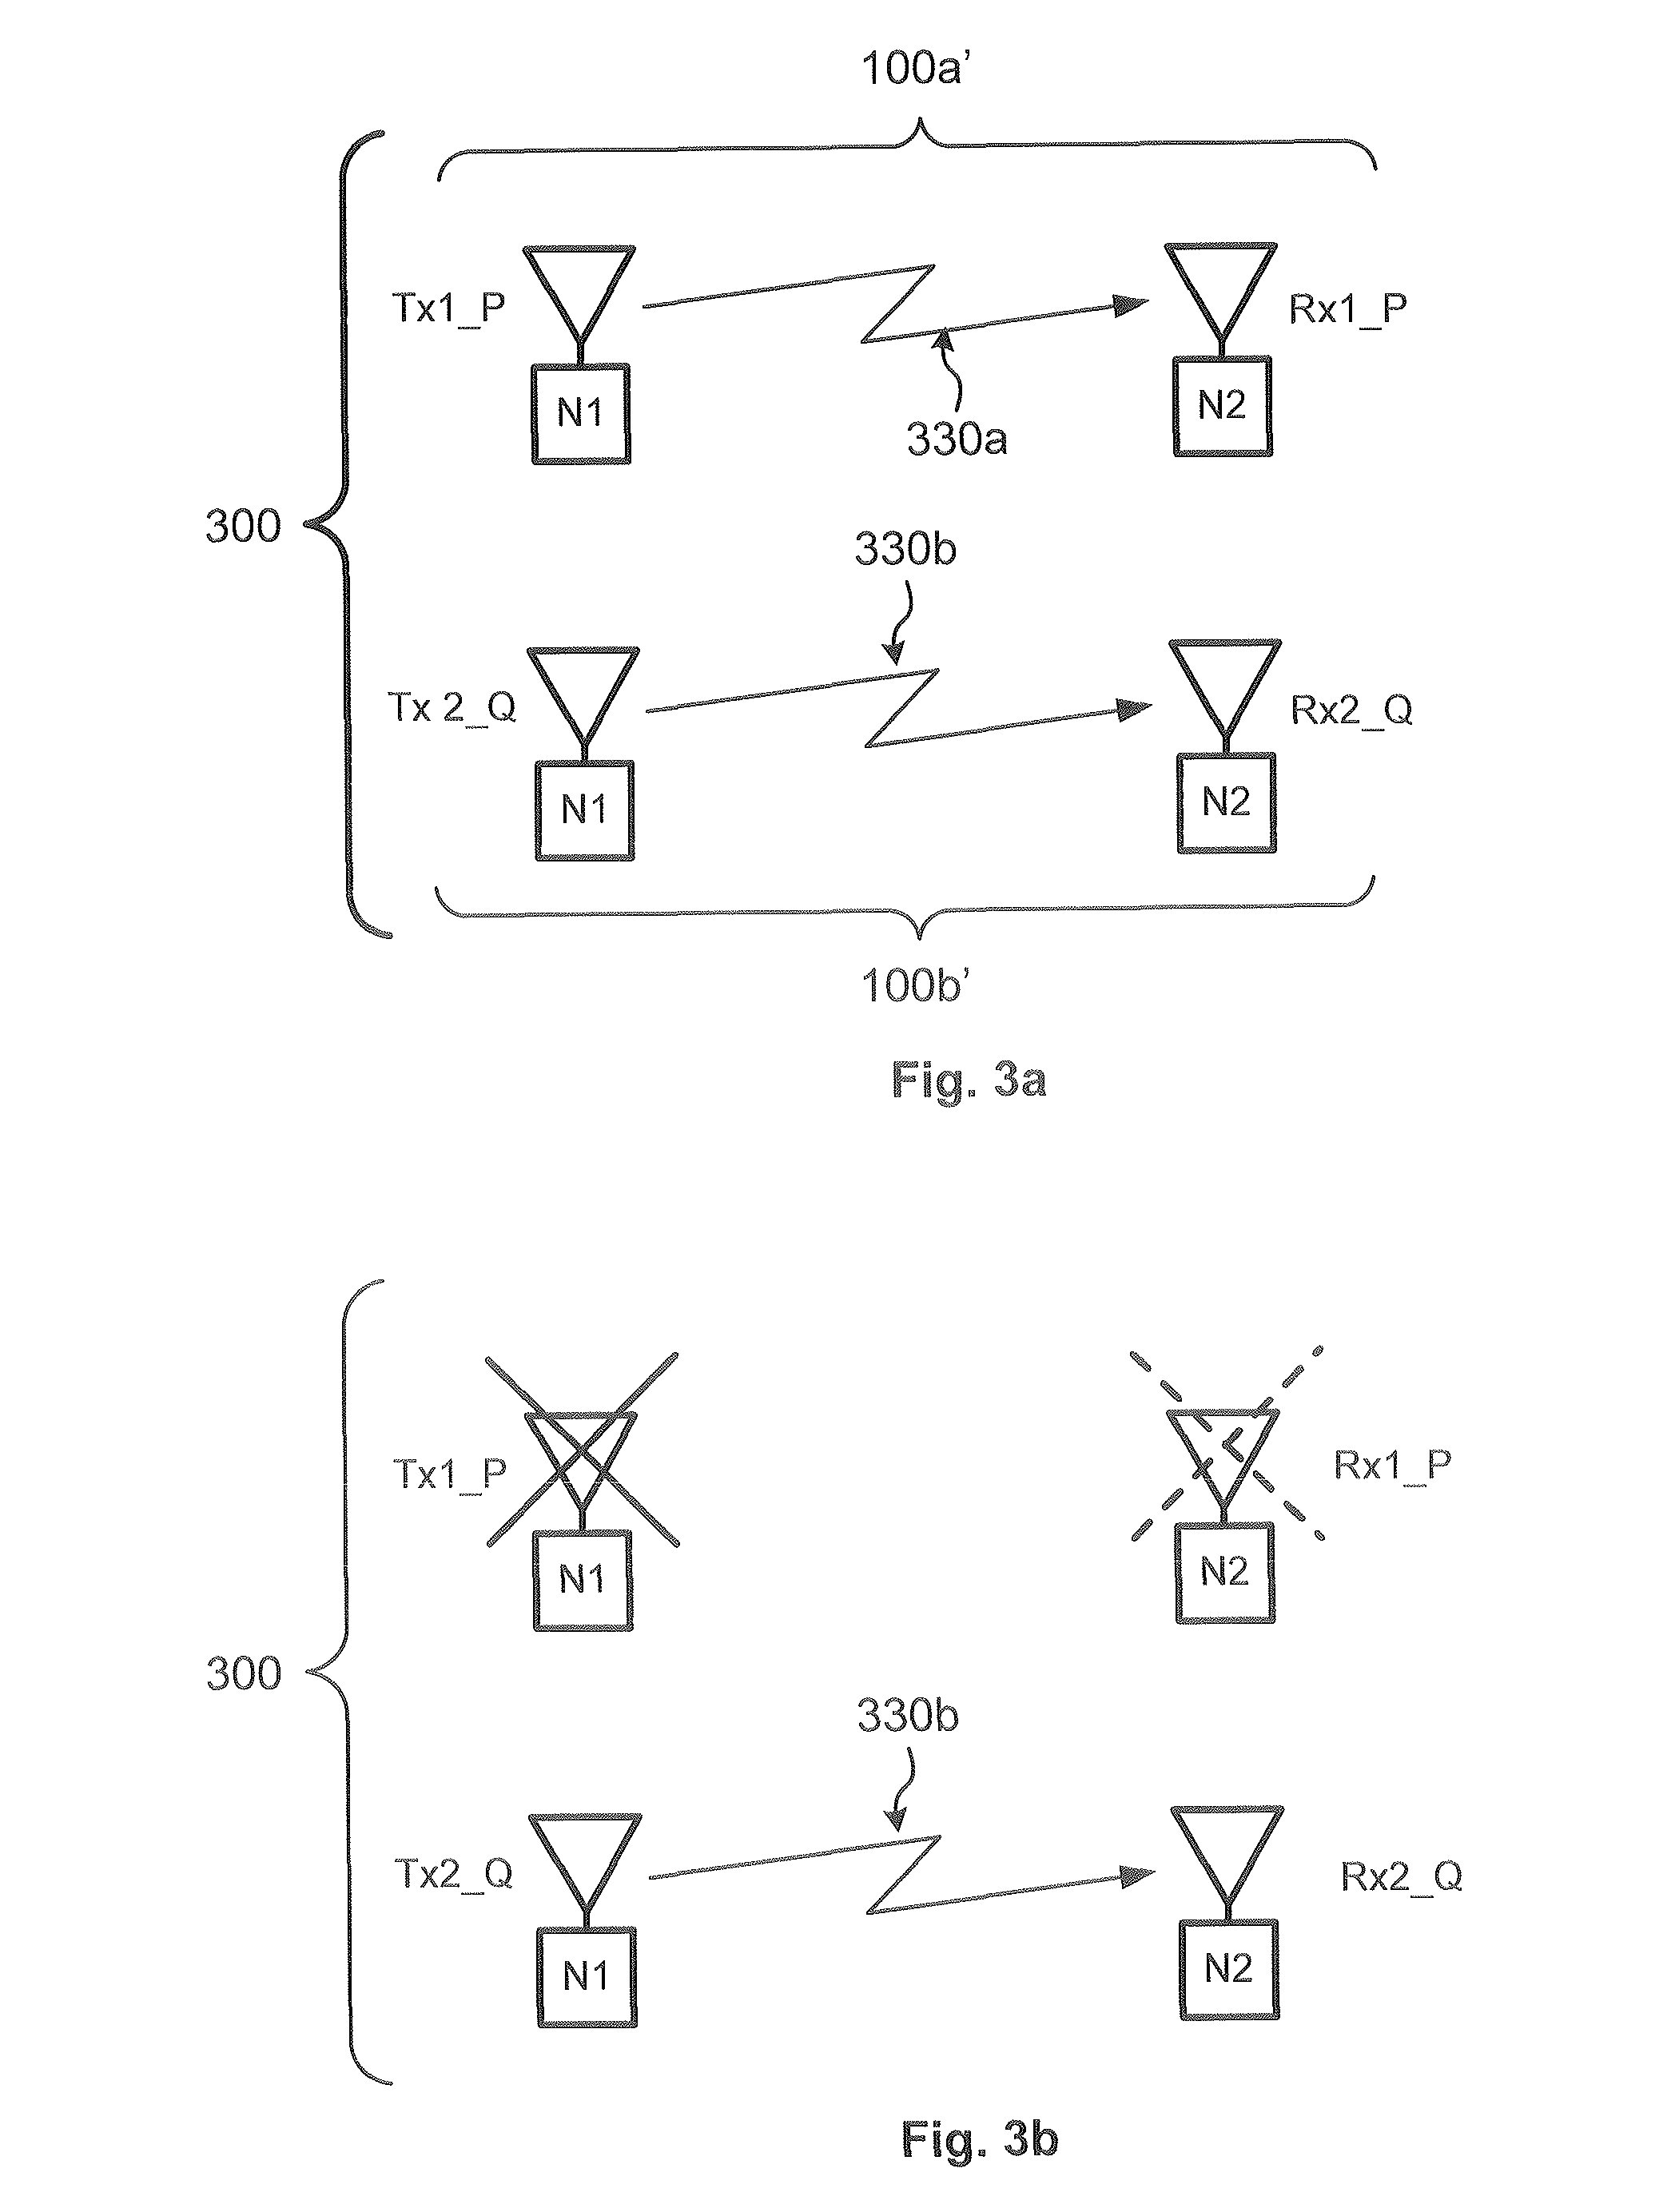 Method for backhaul link protection in a MIMO wireless link